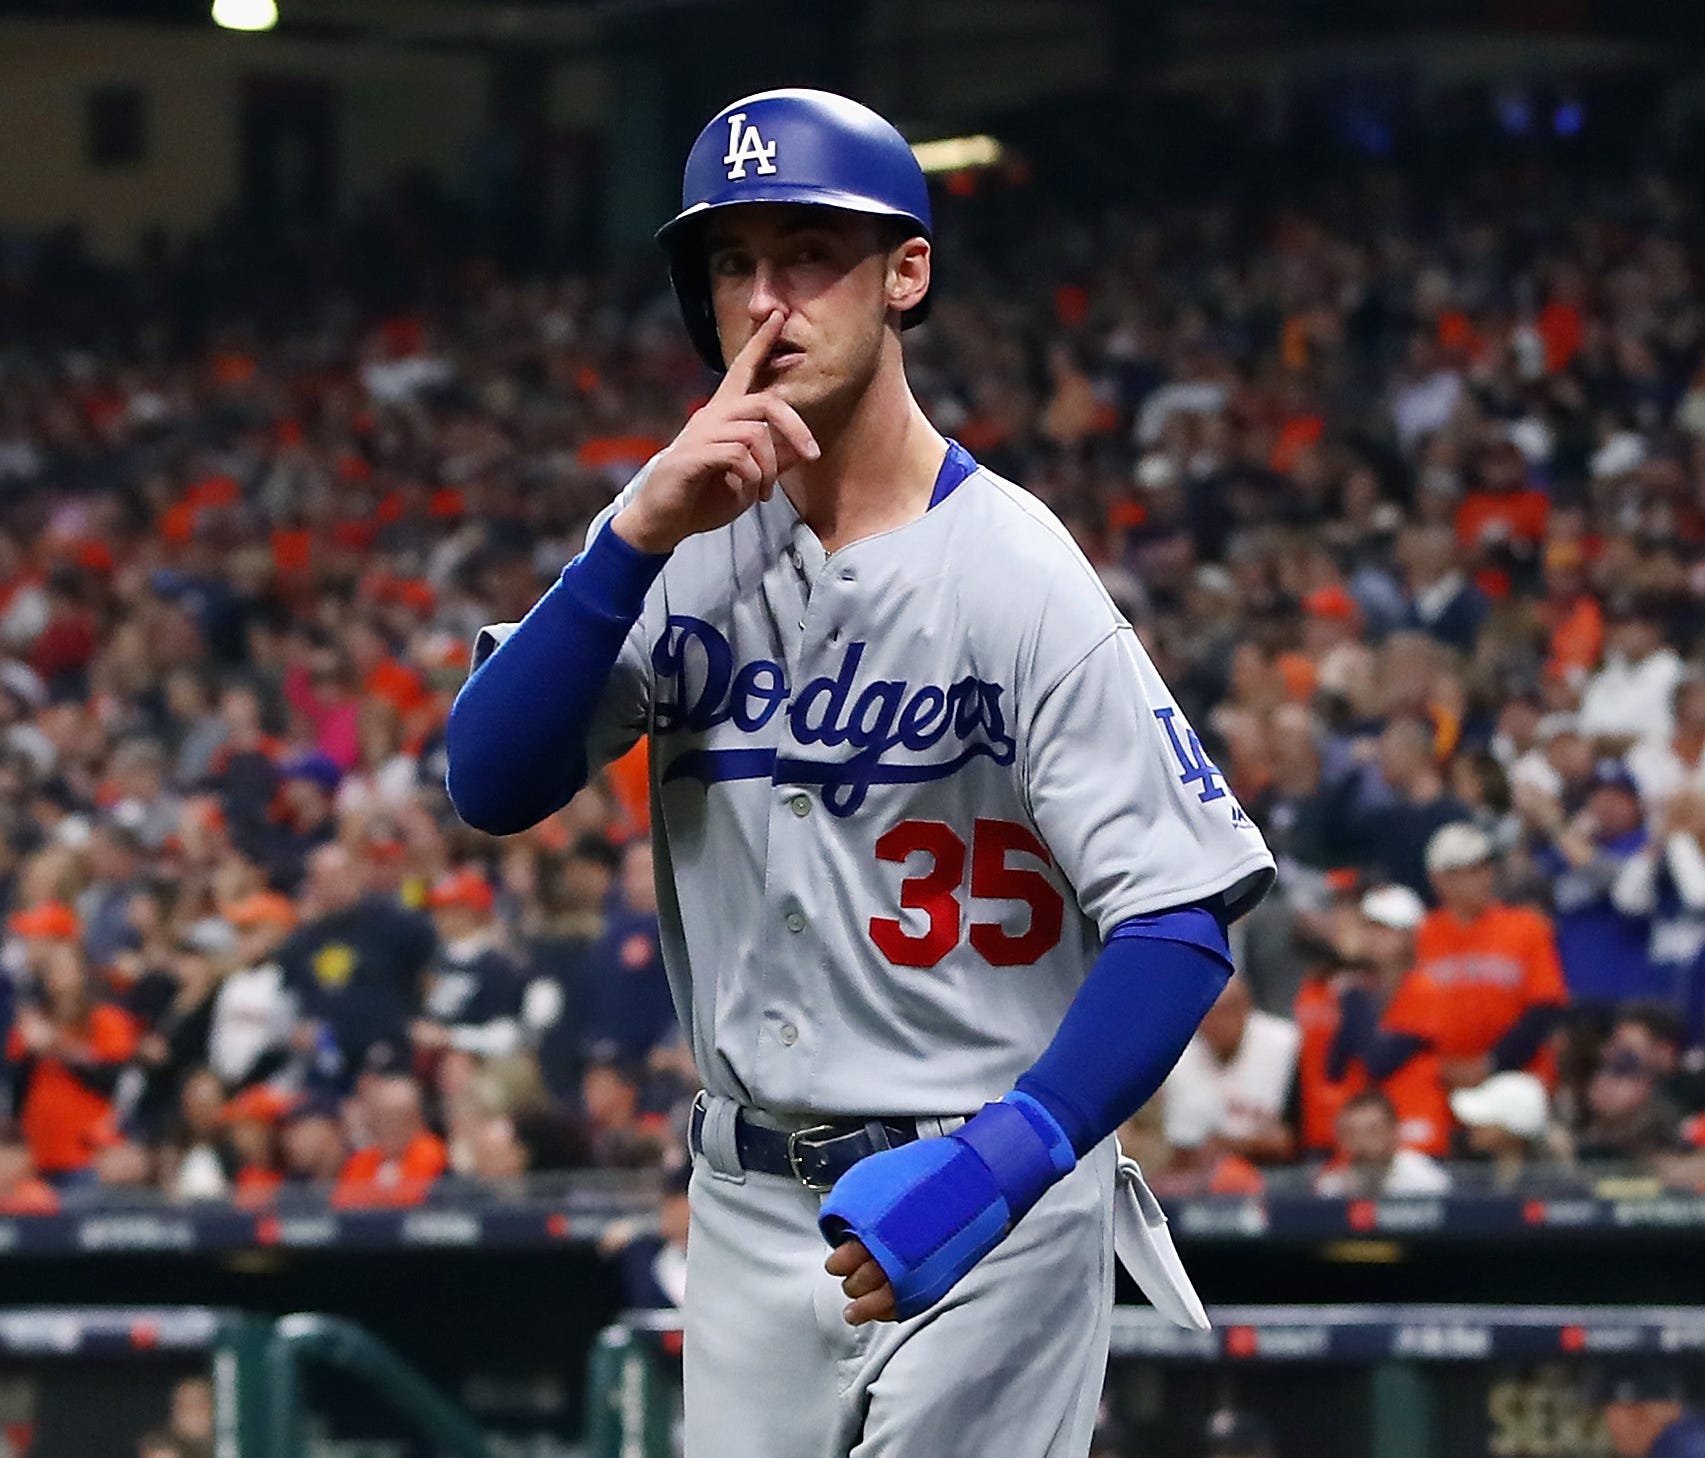 Cody Bellinger broke out of his World Series slump with two doubles in Game 4.